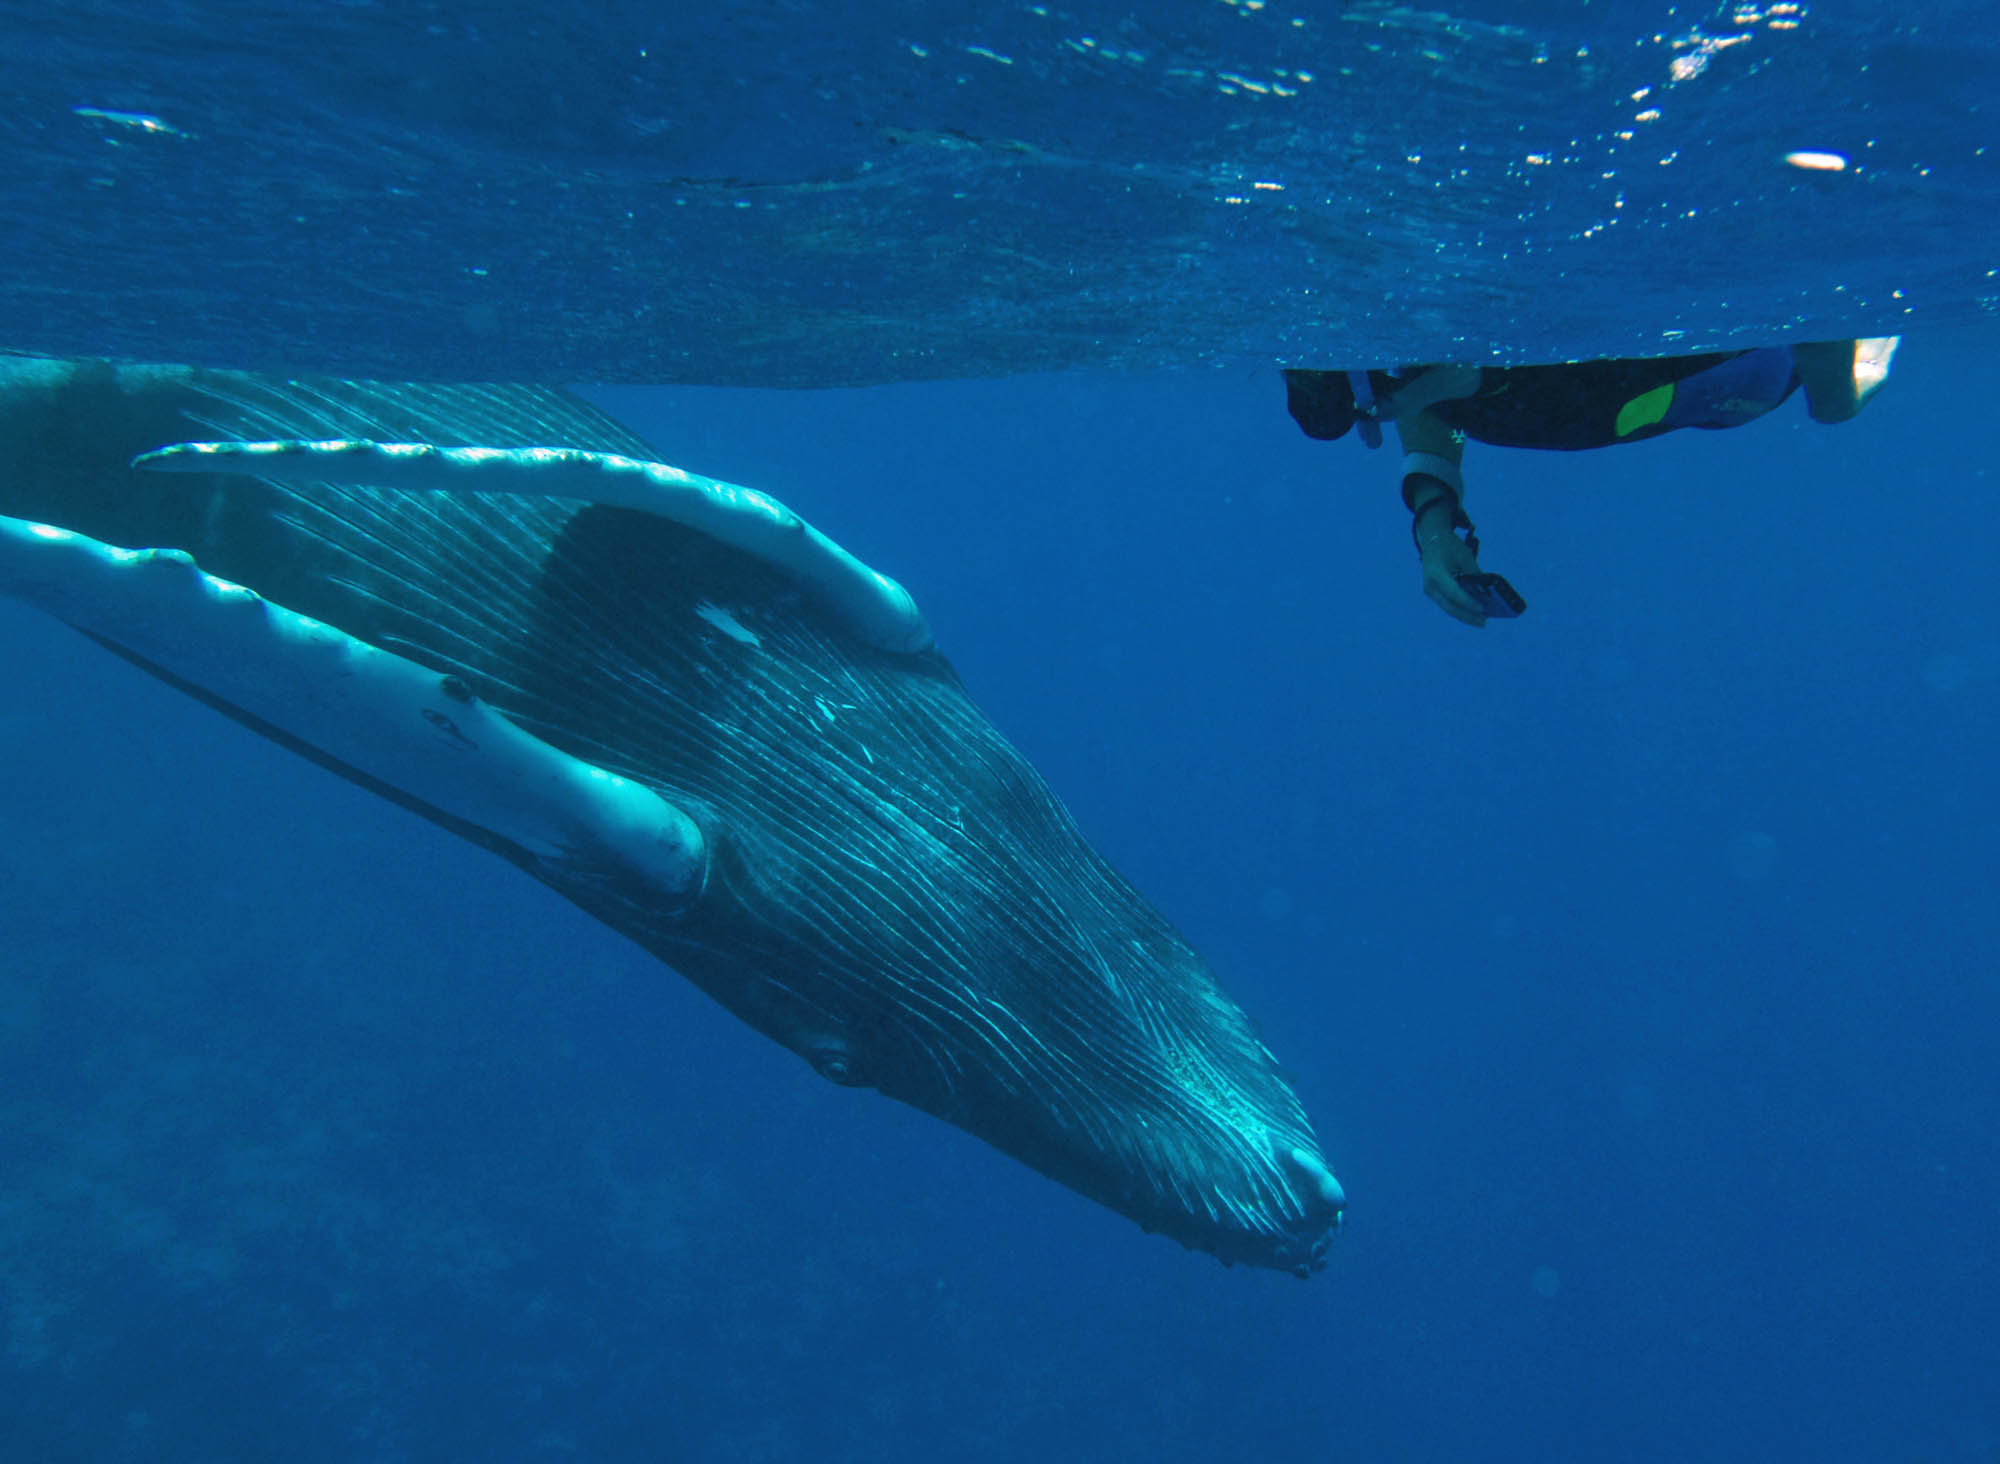 Swim Snorkel with Humpback Whales in the Silverbanks - Rob Smith